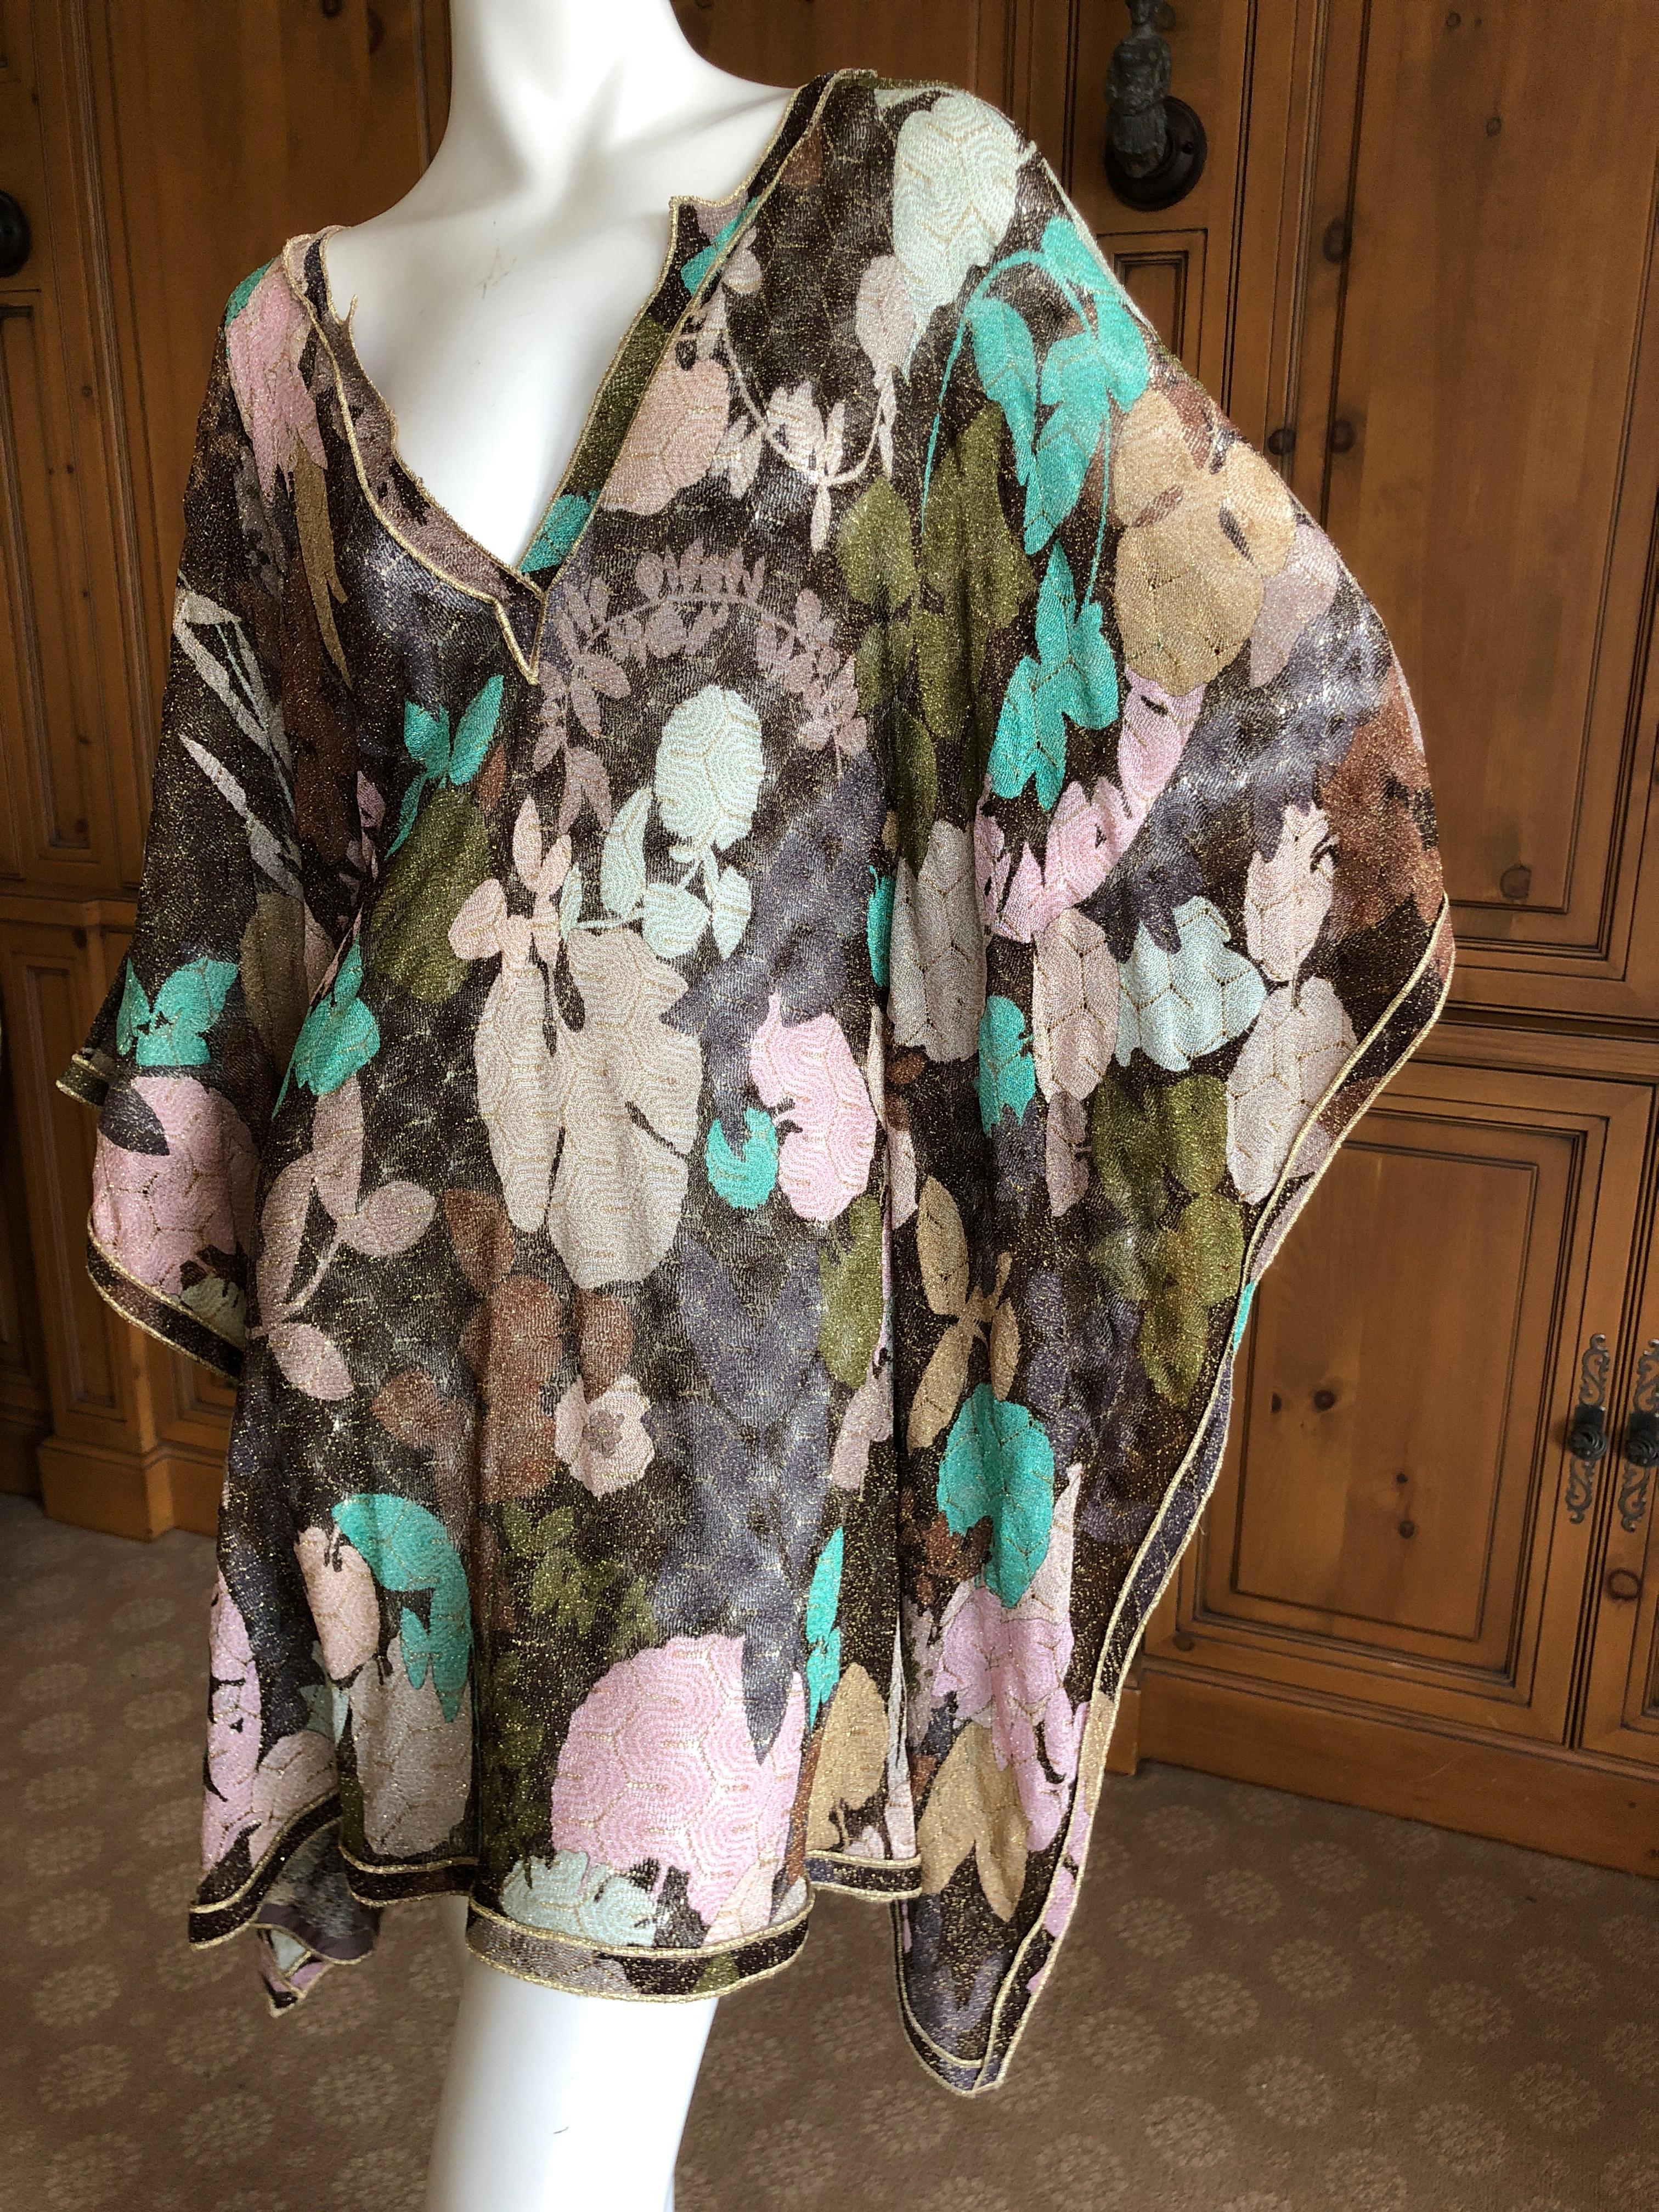 Missoni Mare Vintage Gold Trim Poncho Beach Cover In Good Condition For Sale In Cloverdale, CA